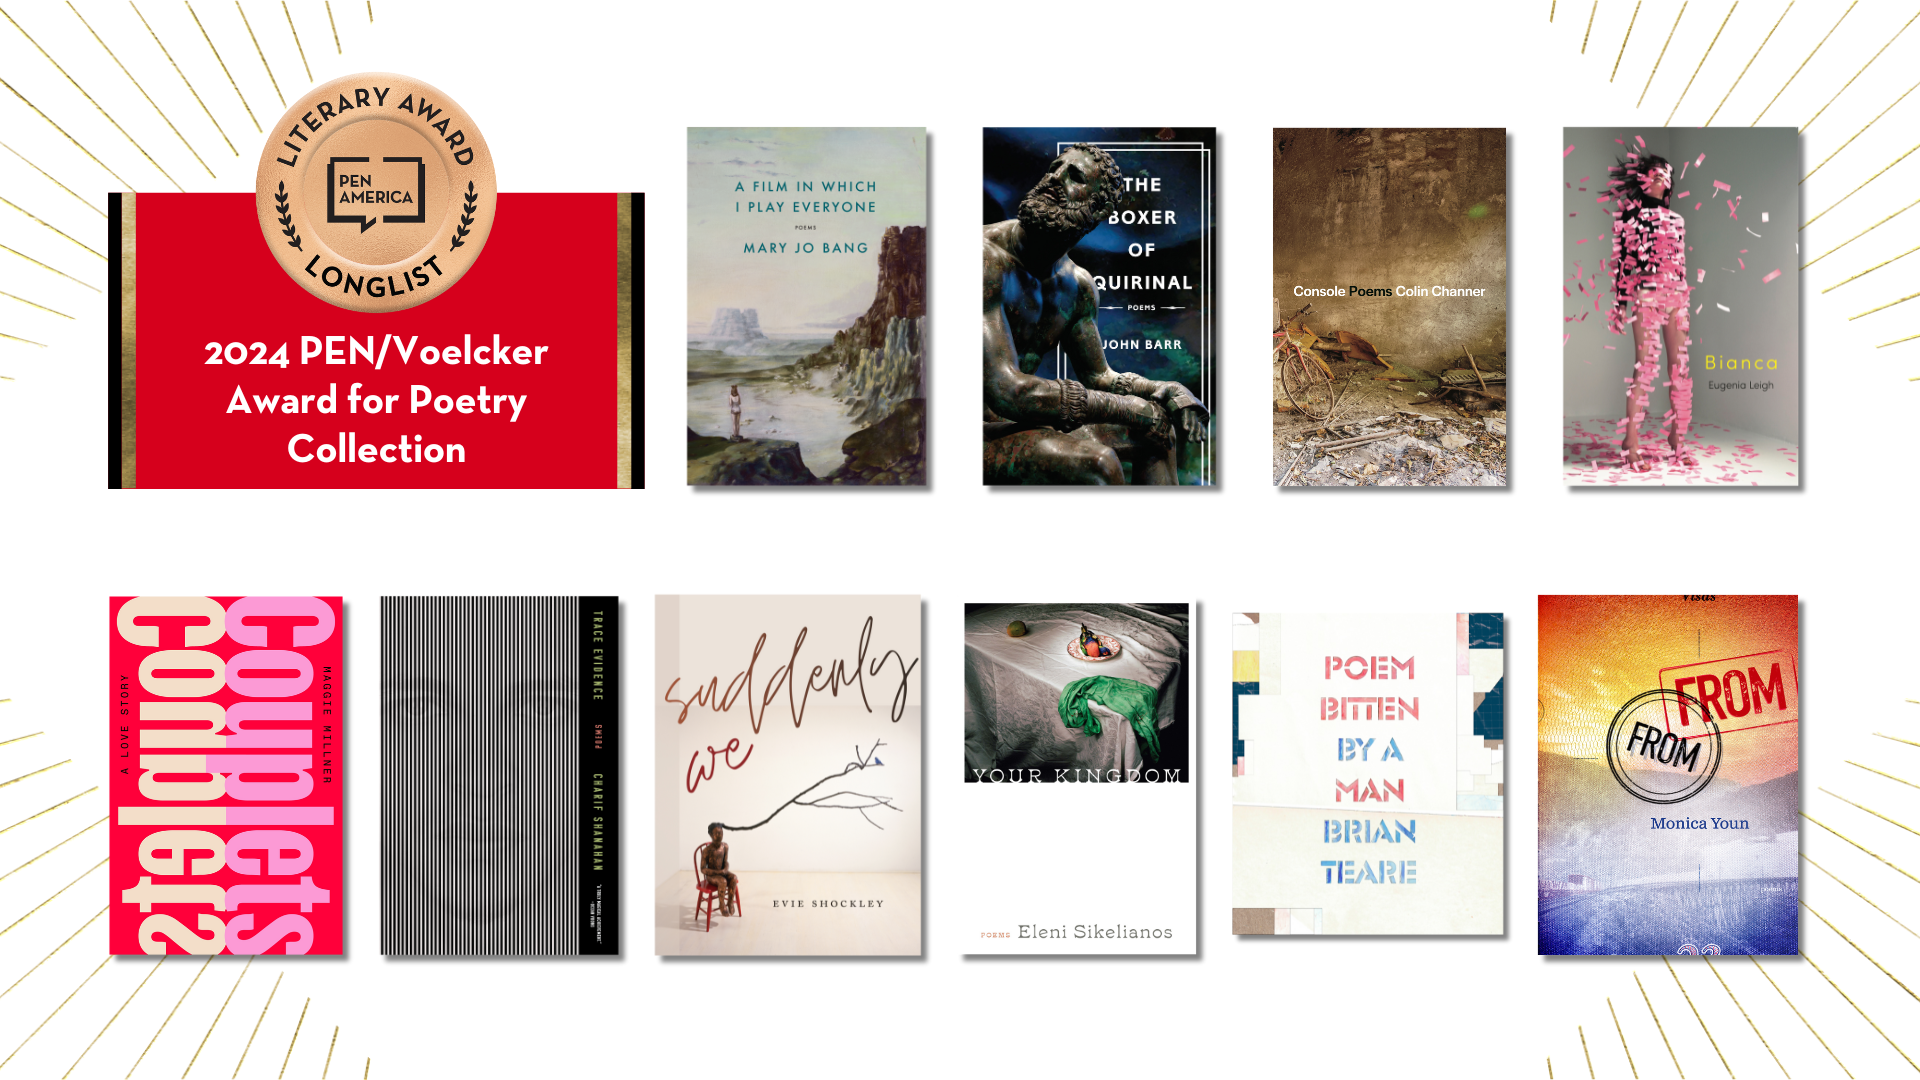 PEN_Voelcker Award for Poetry Collection 2024 longlist book covers